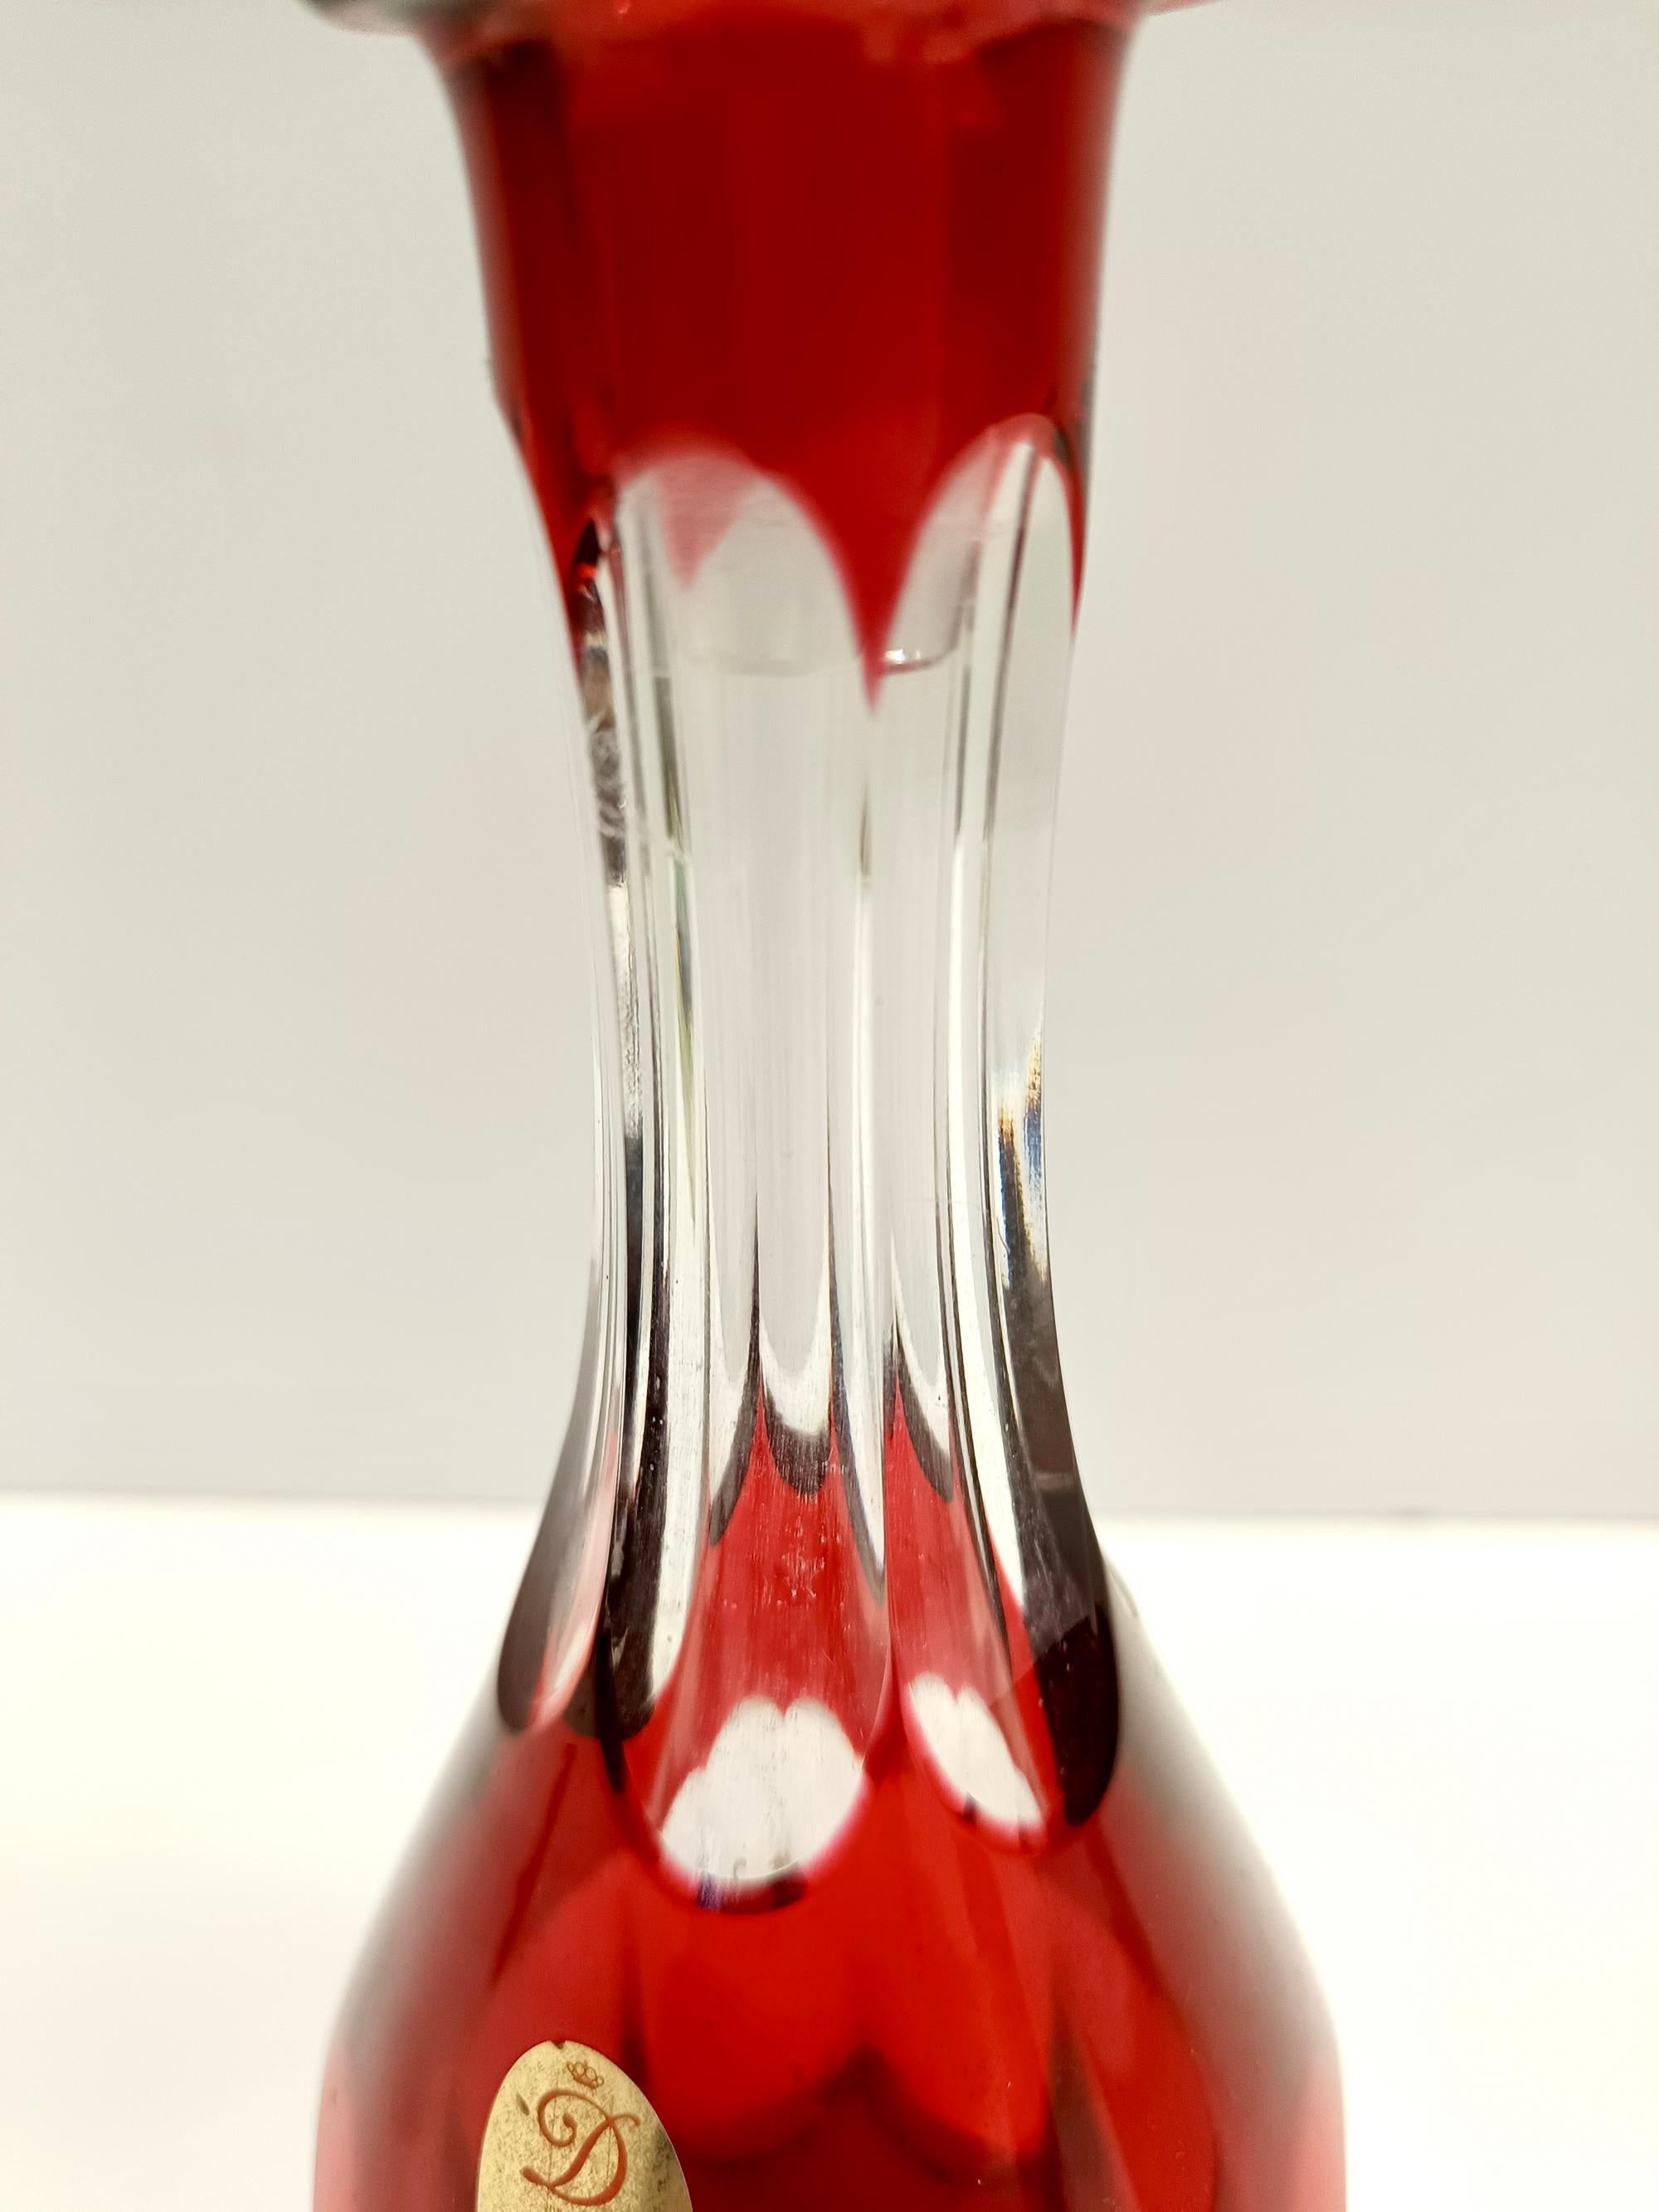 Bohemian Transparent and Red Crystal Decanter Bottle by Dresden Crystal, Italy For Sale 3